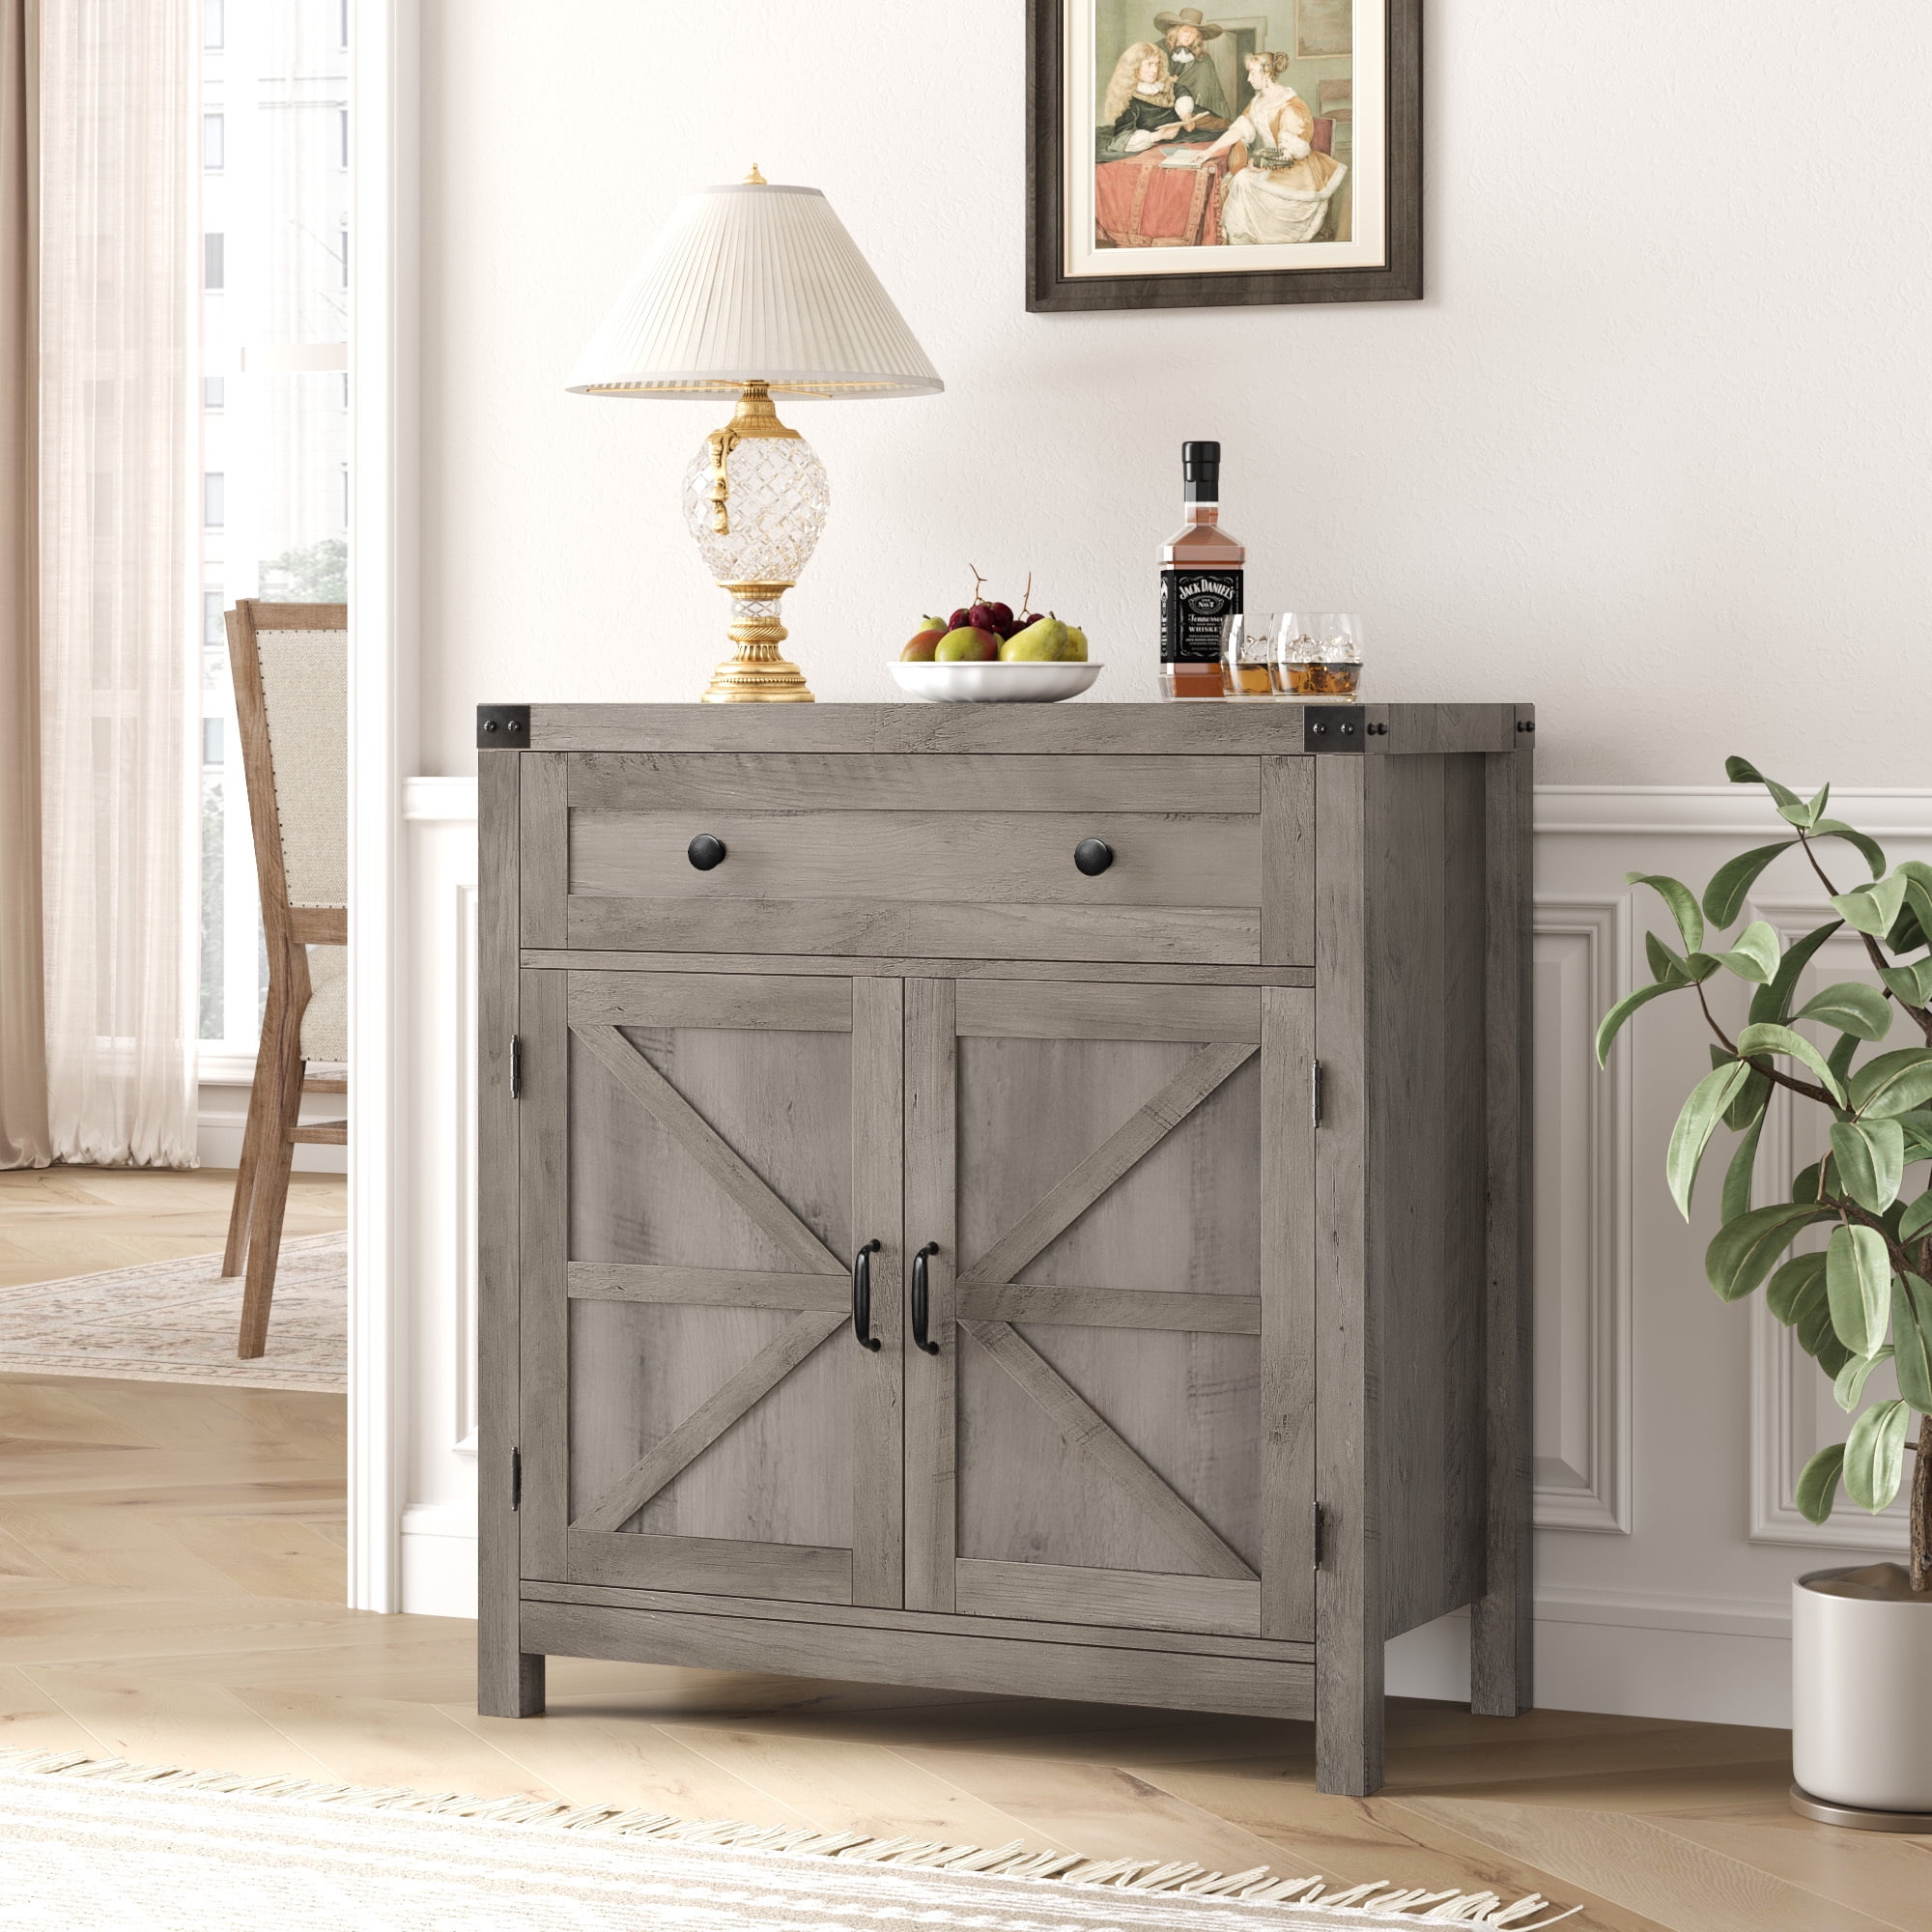 Homfa Kitchen Buffet Sideboard with Drawer, Compact Coffee Bar with ...